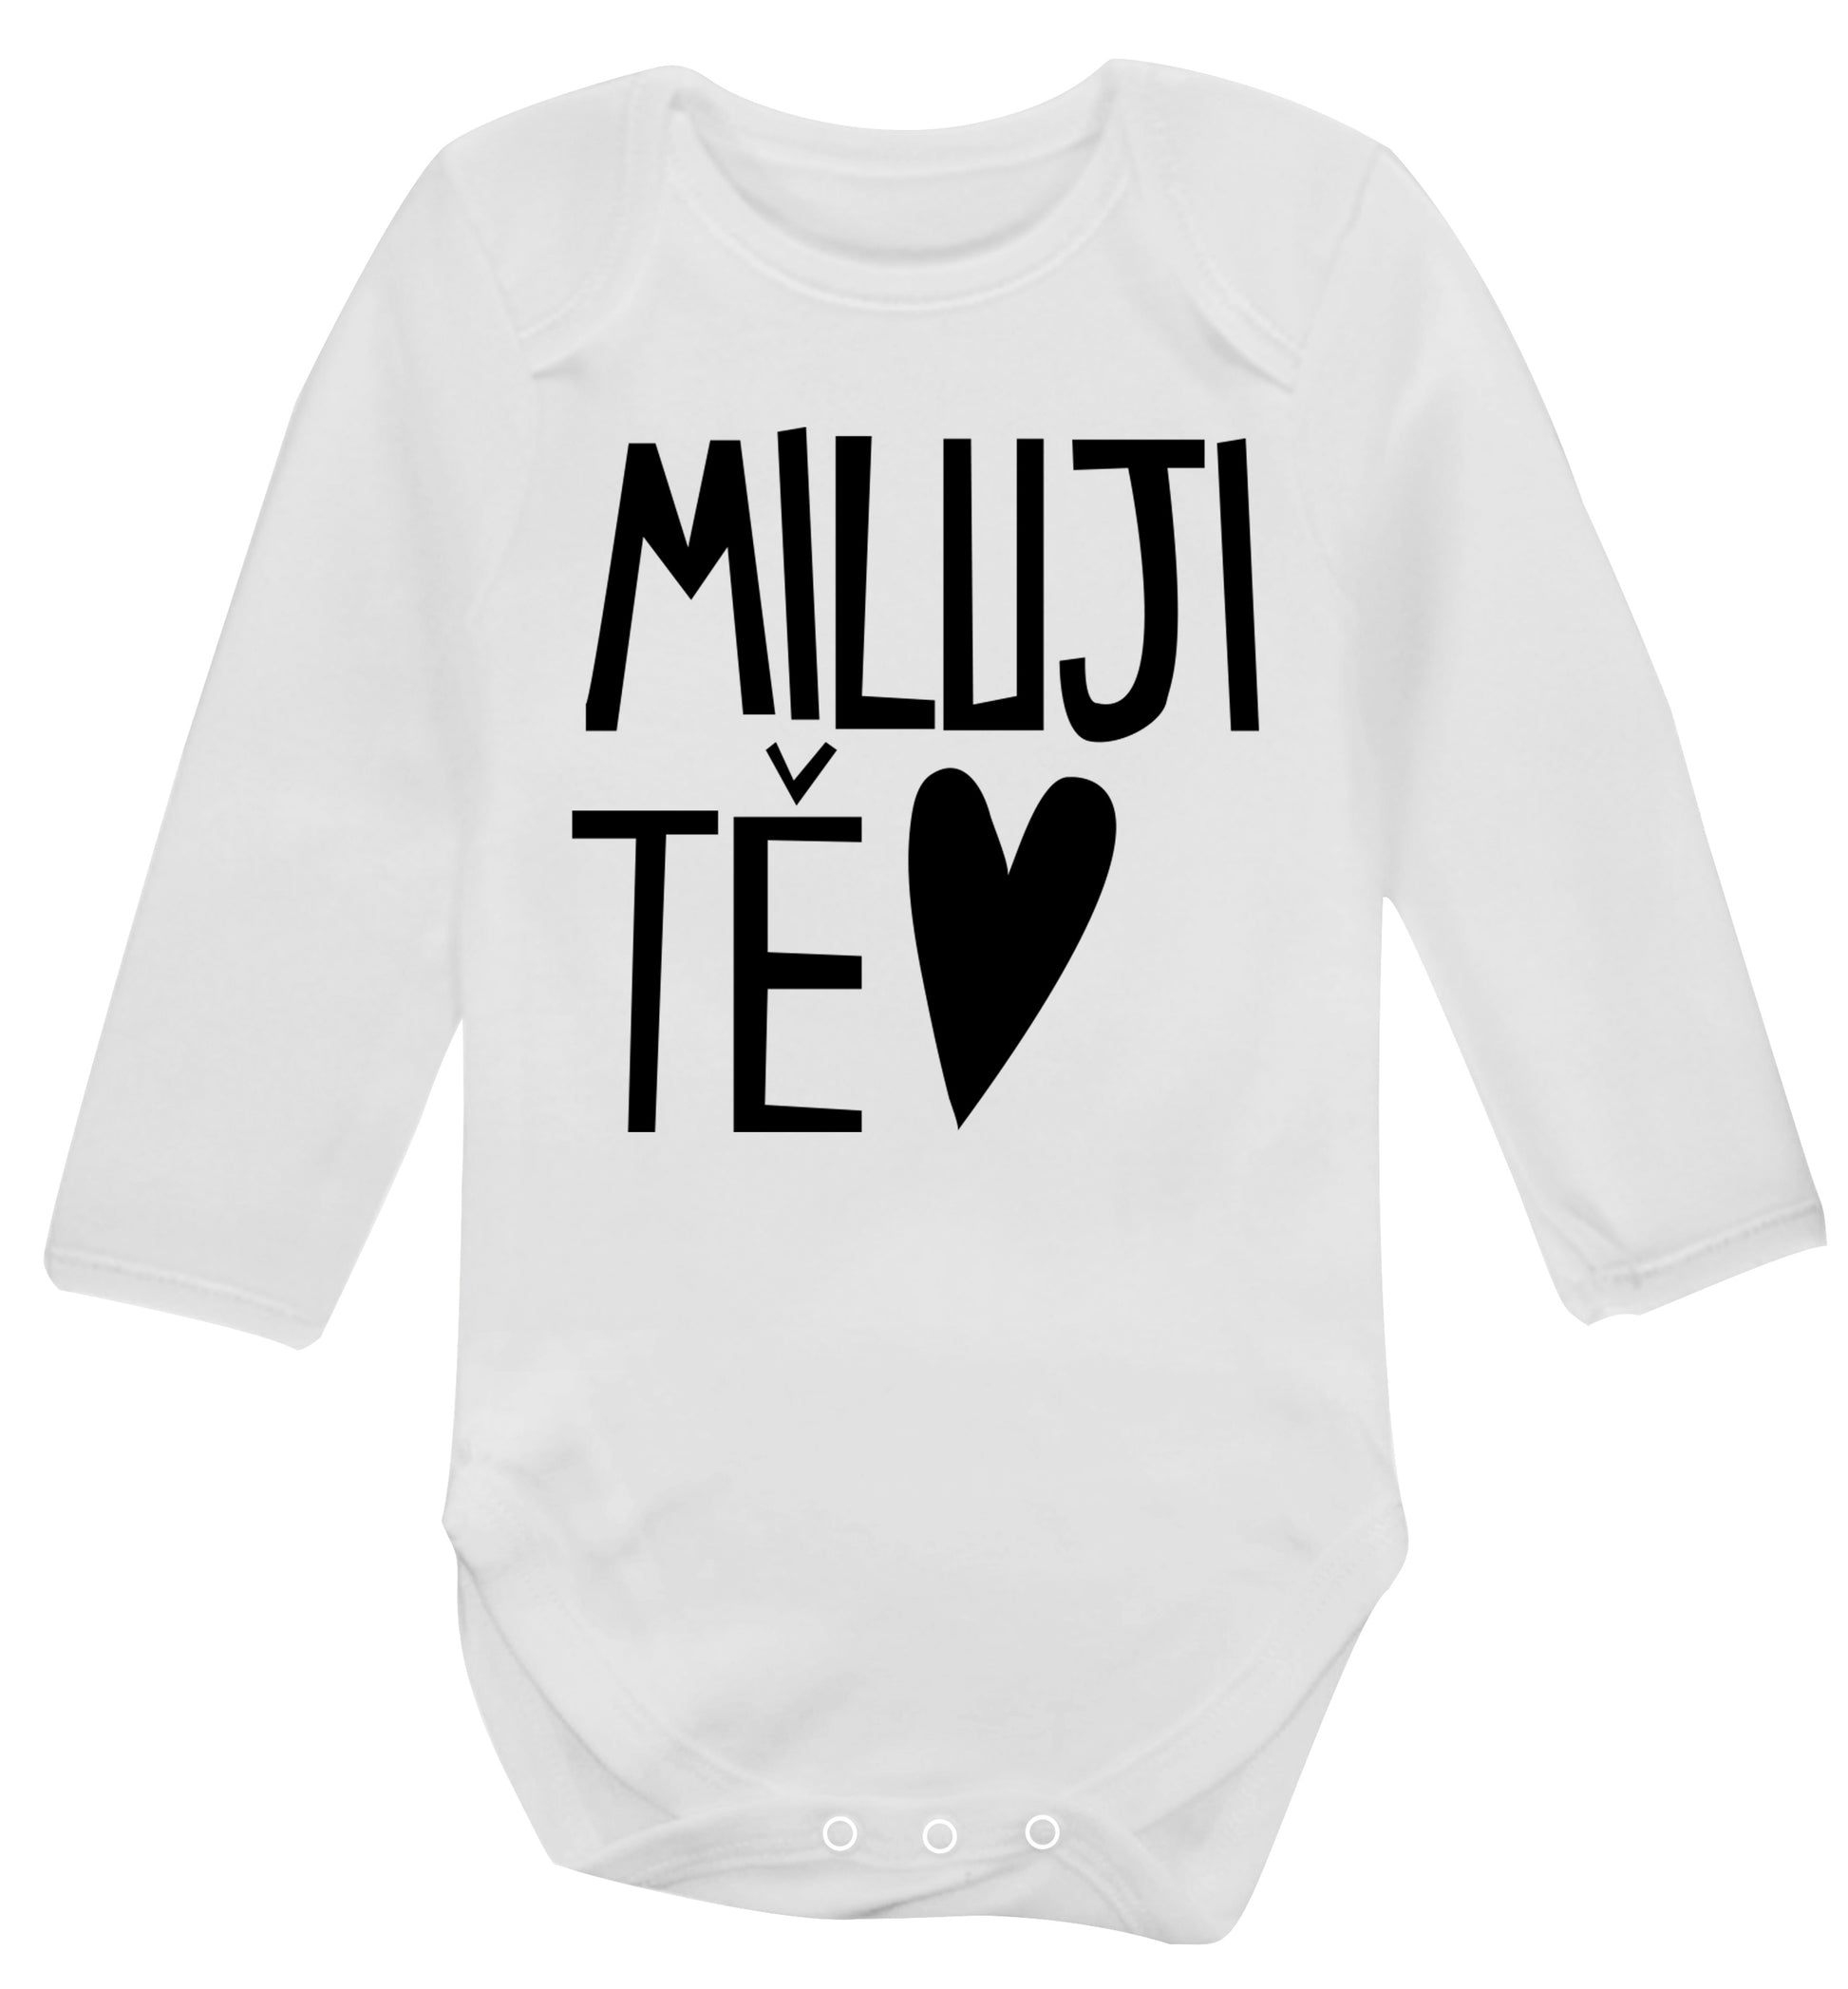 Miluji T_ - I love you Baby Vest long sleeved white 6-12 months